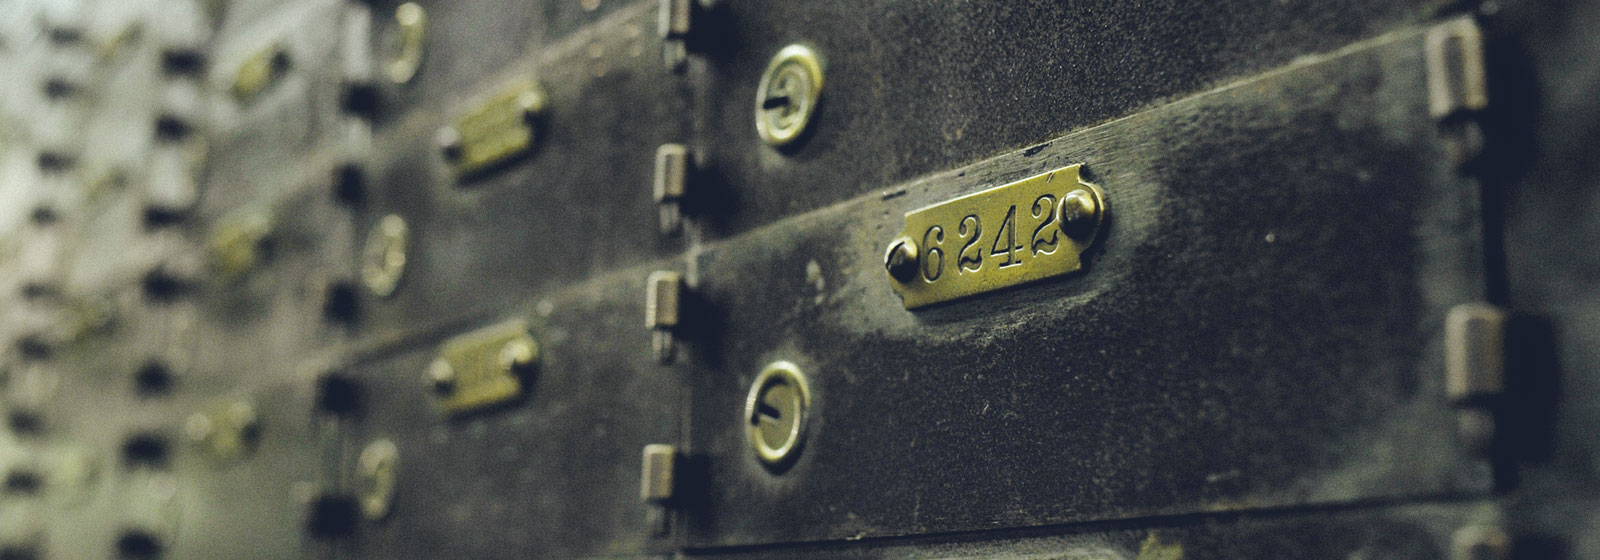 A history of vaults & storage